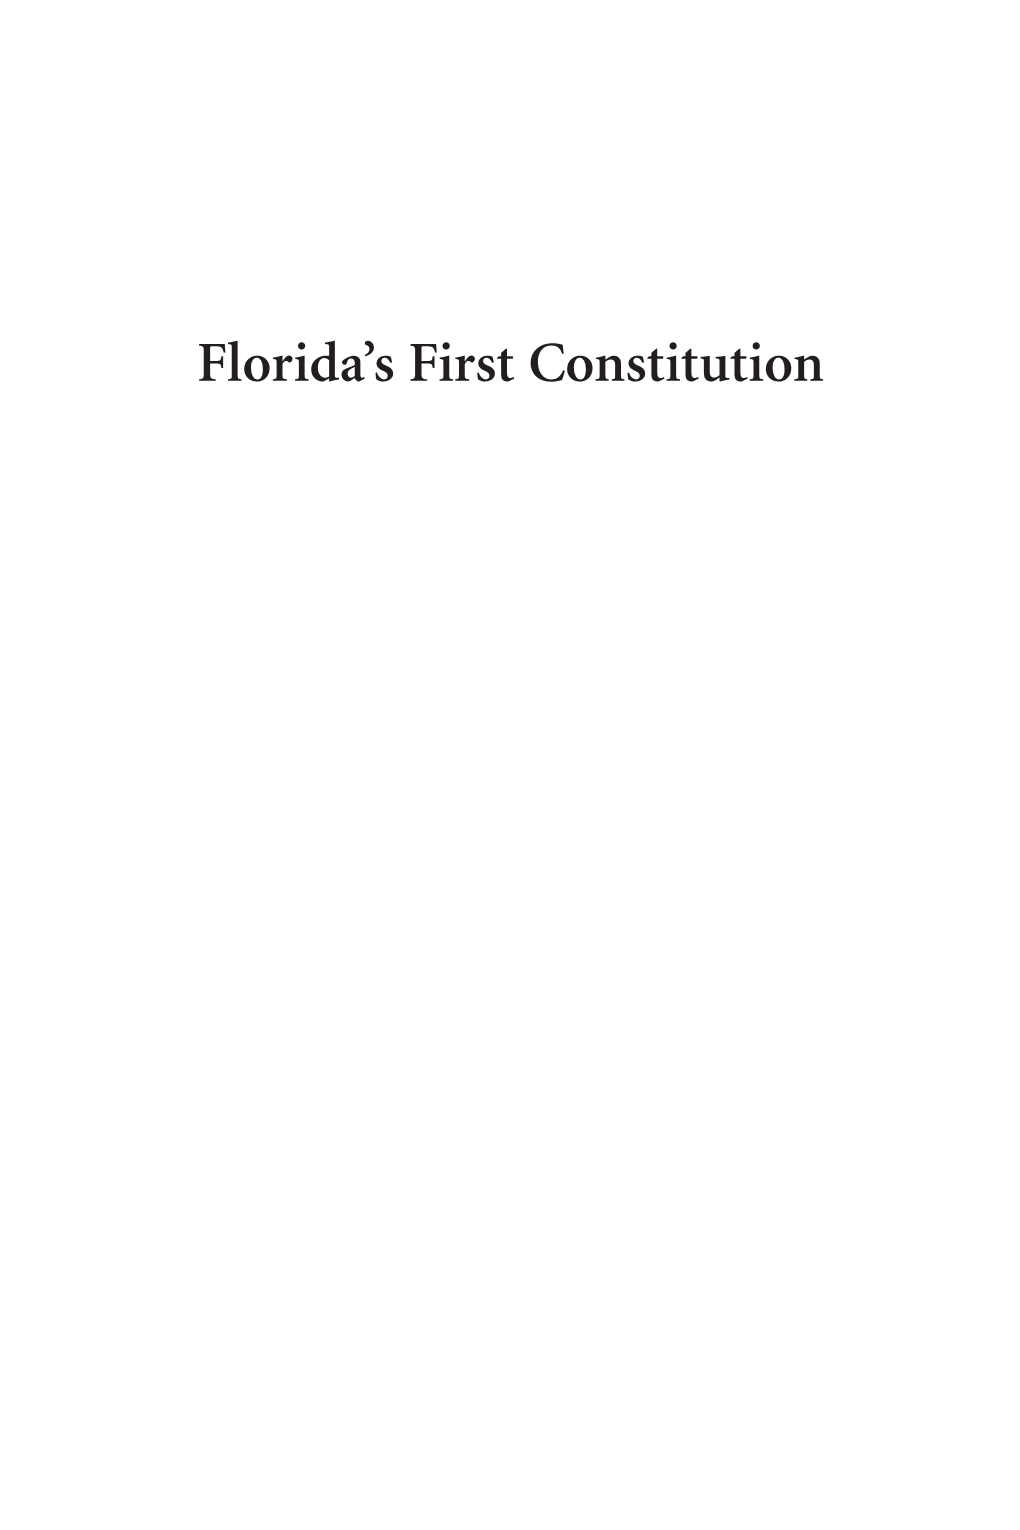 Florida's First Constitution